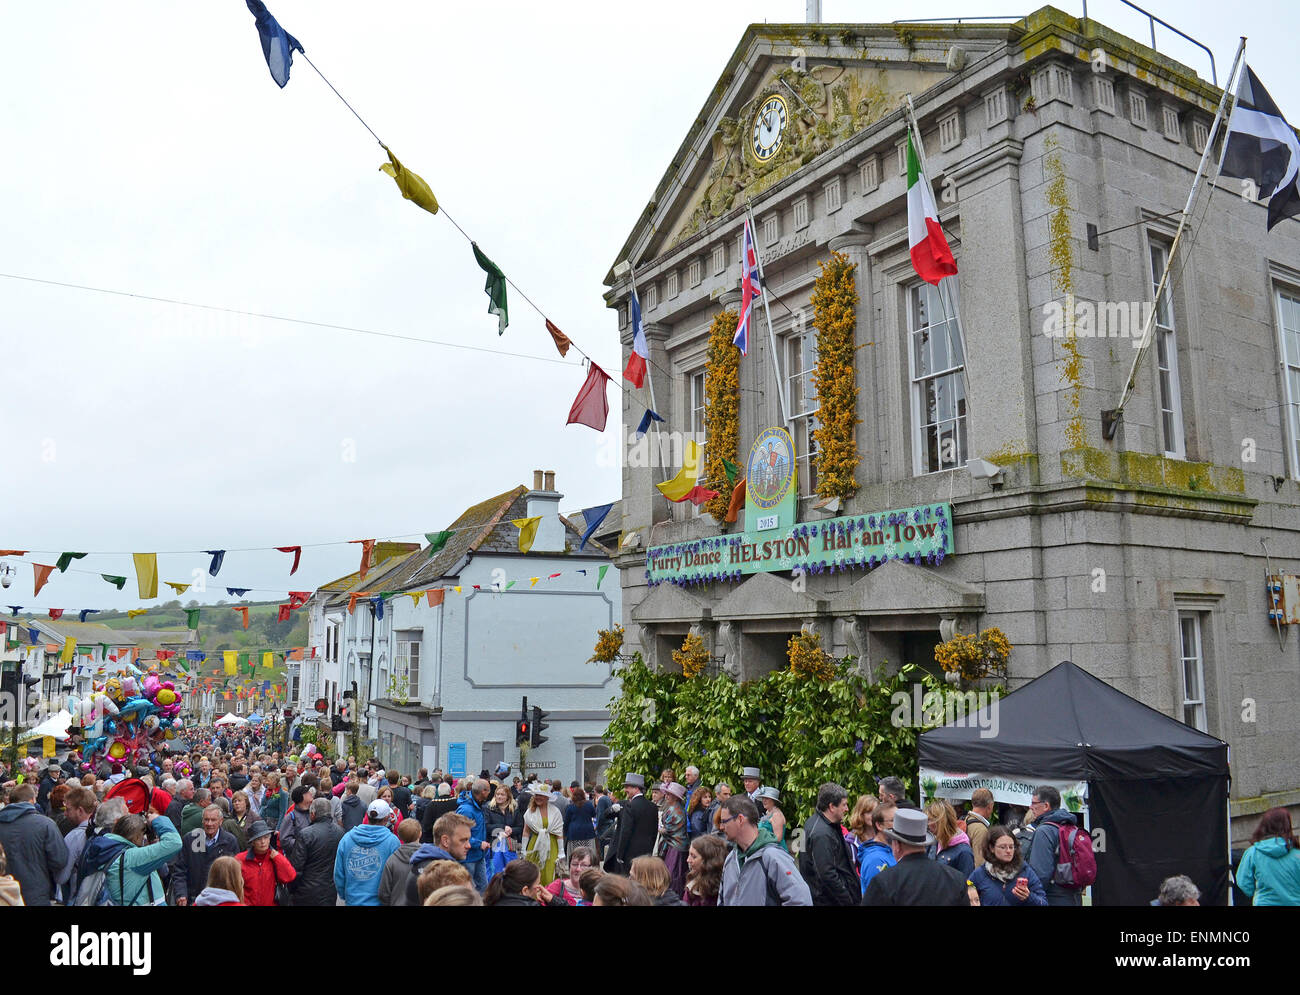 The streets of Helston in Cornwall, UK are packed with people during the annual flora day celebrations Stock Photo